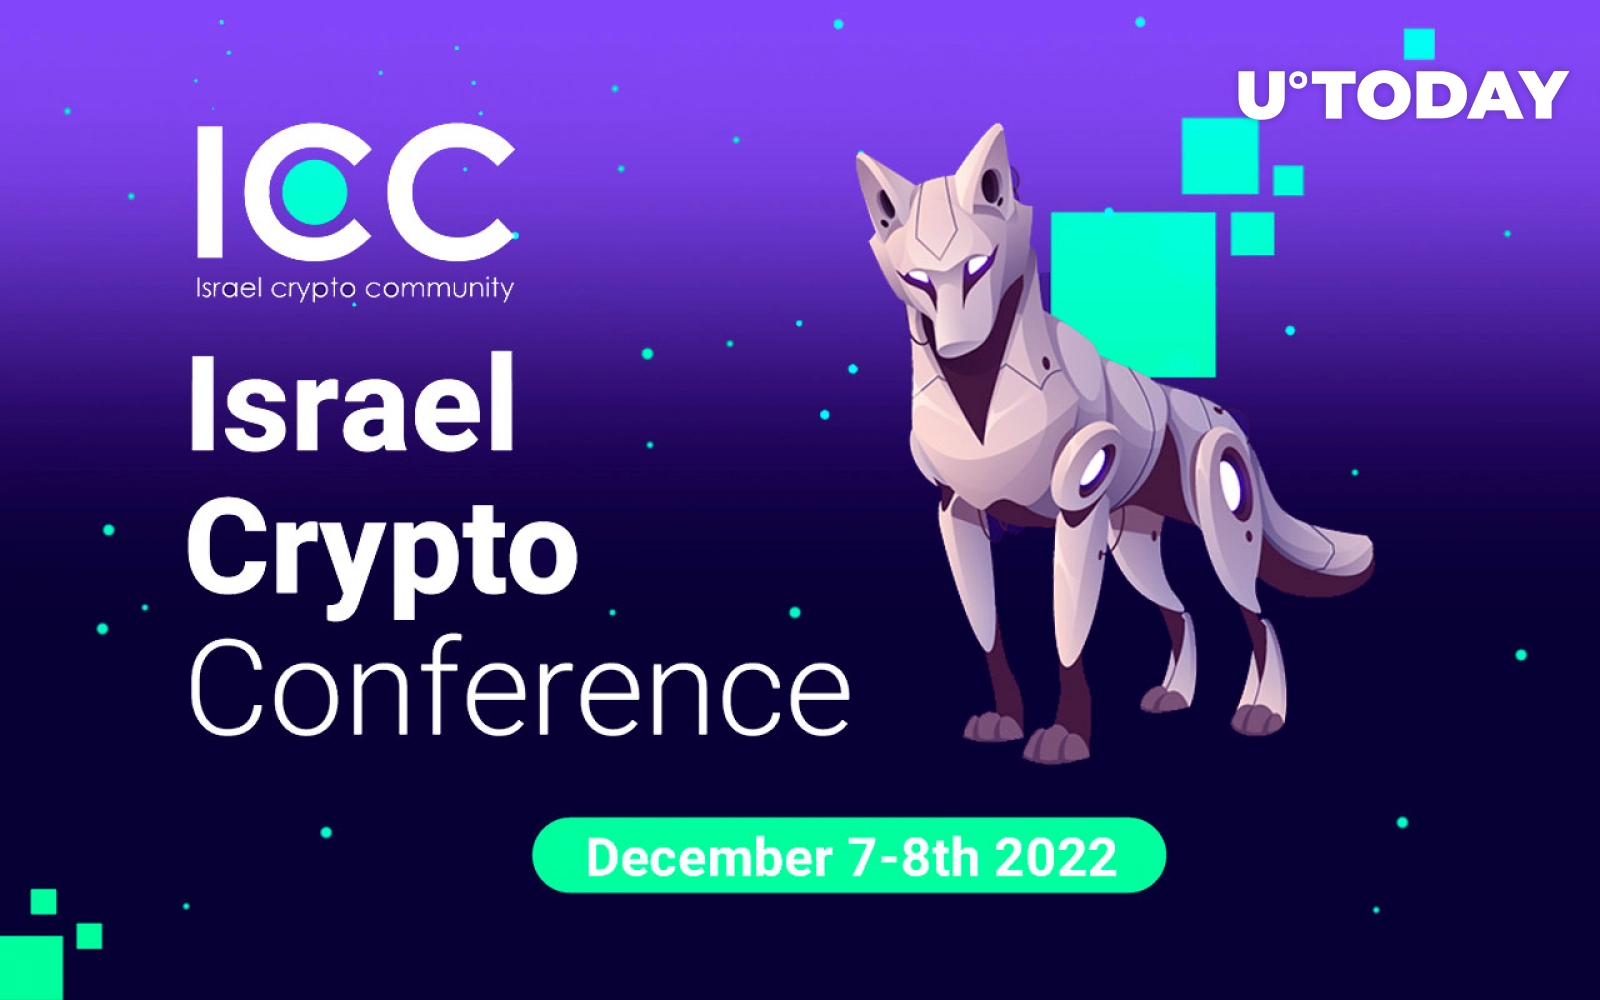 Israel Crypto Conference